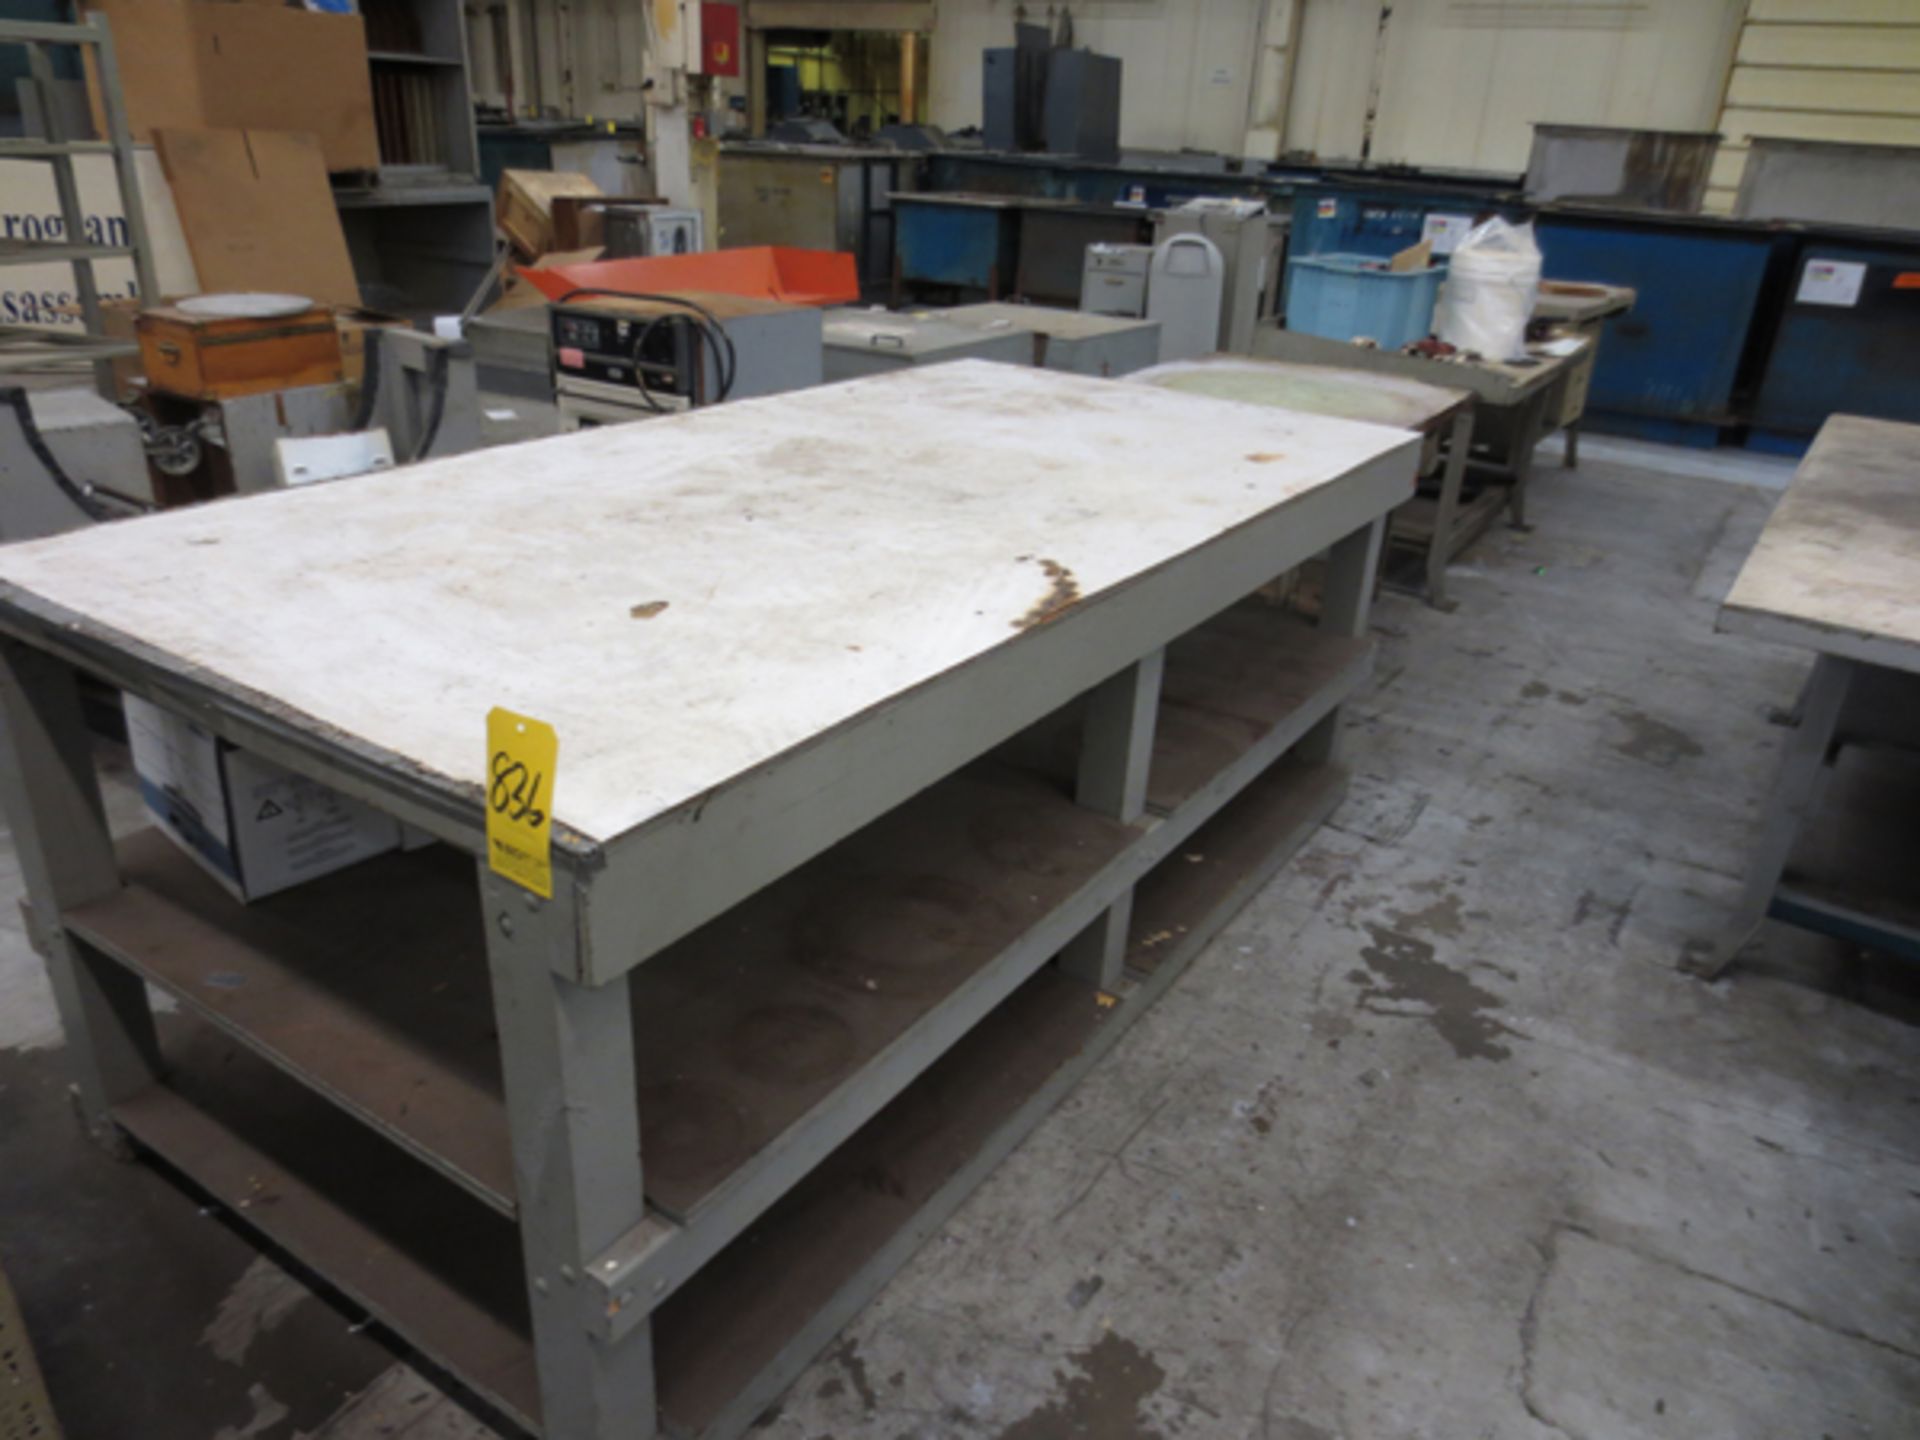 Row Includes 4 Work Benches